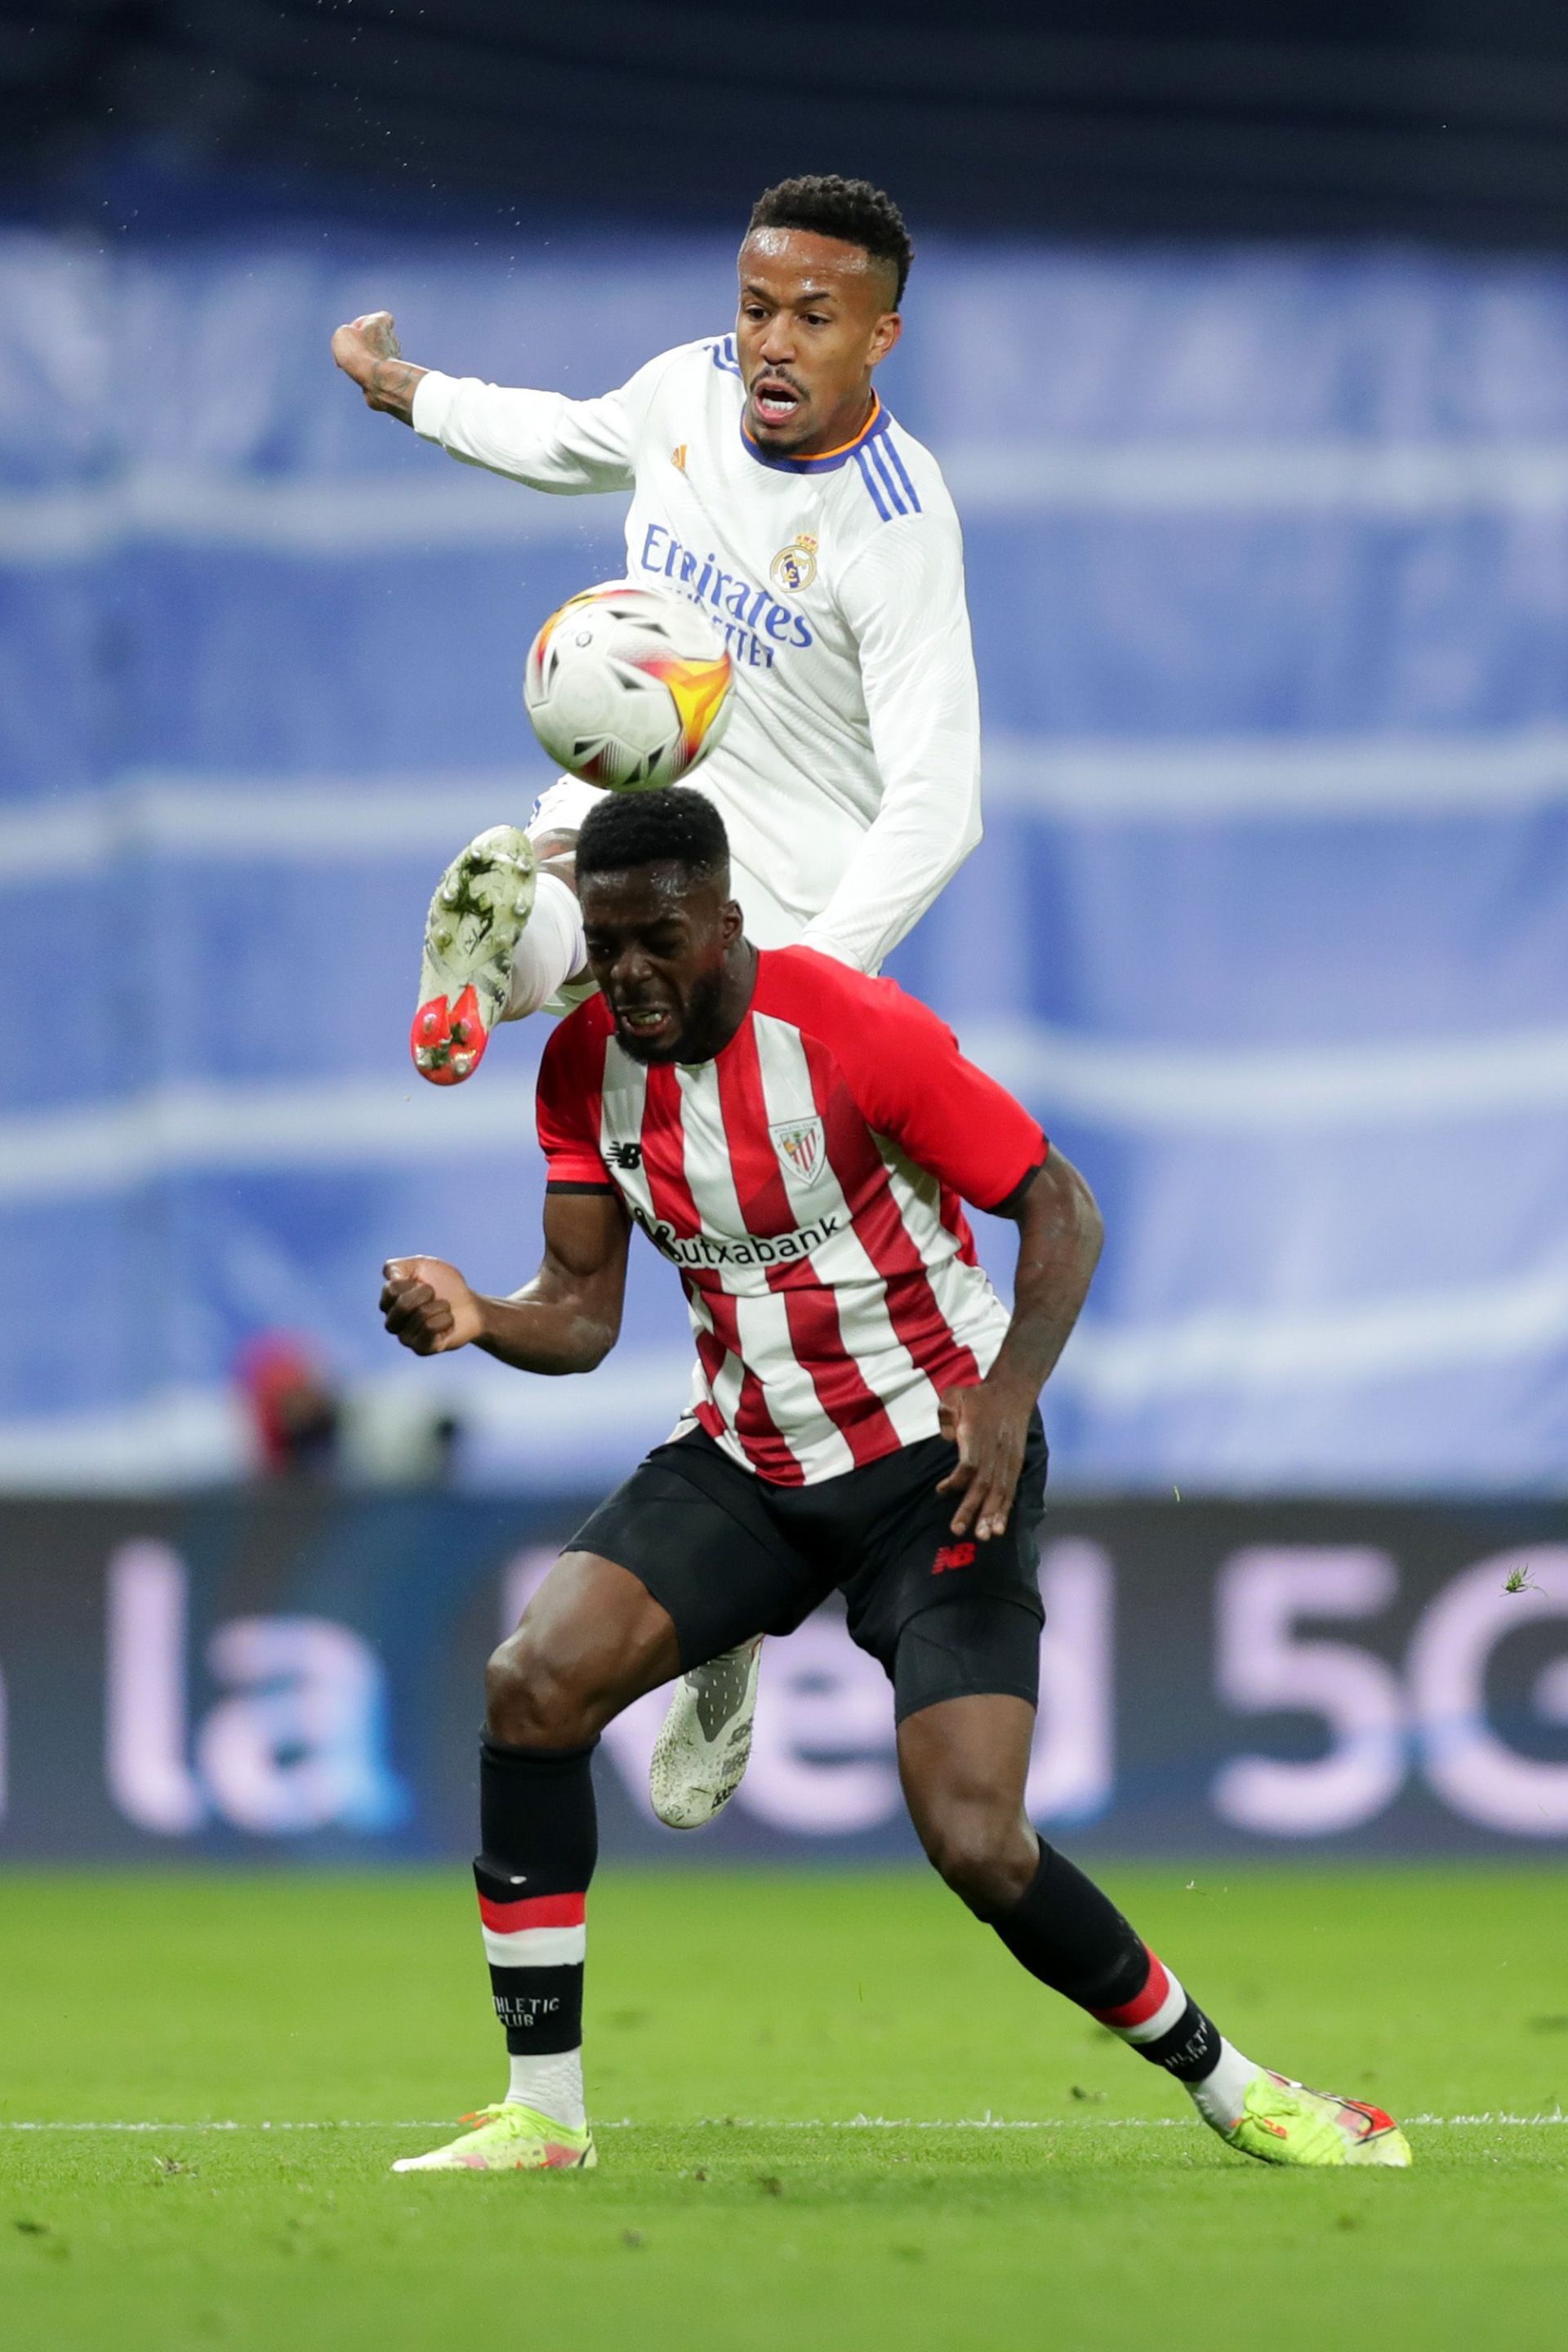 Inaki Williams tussles it out with Eder Militao